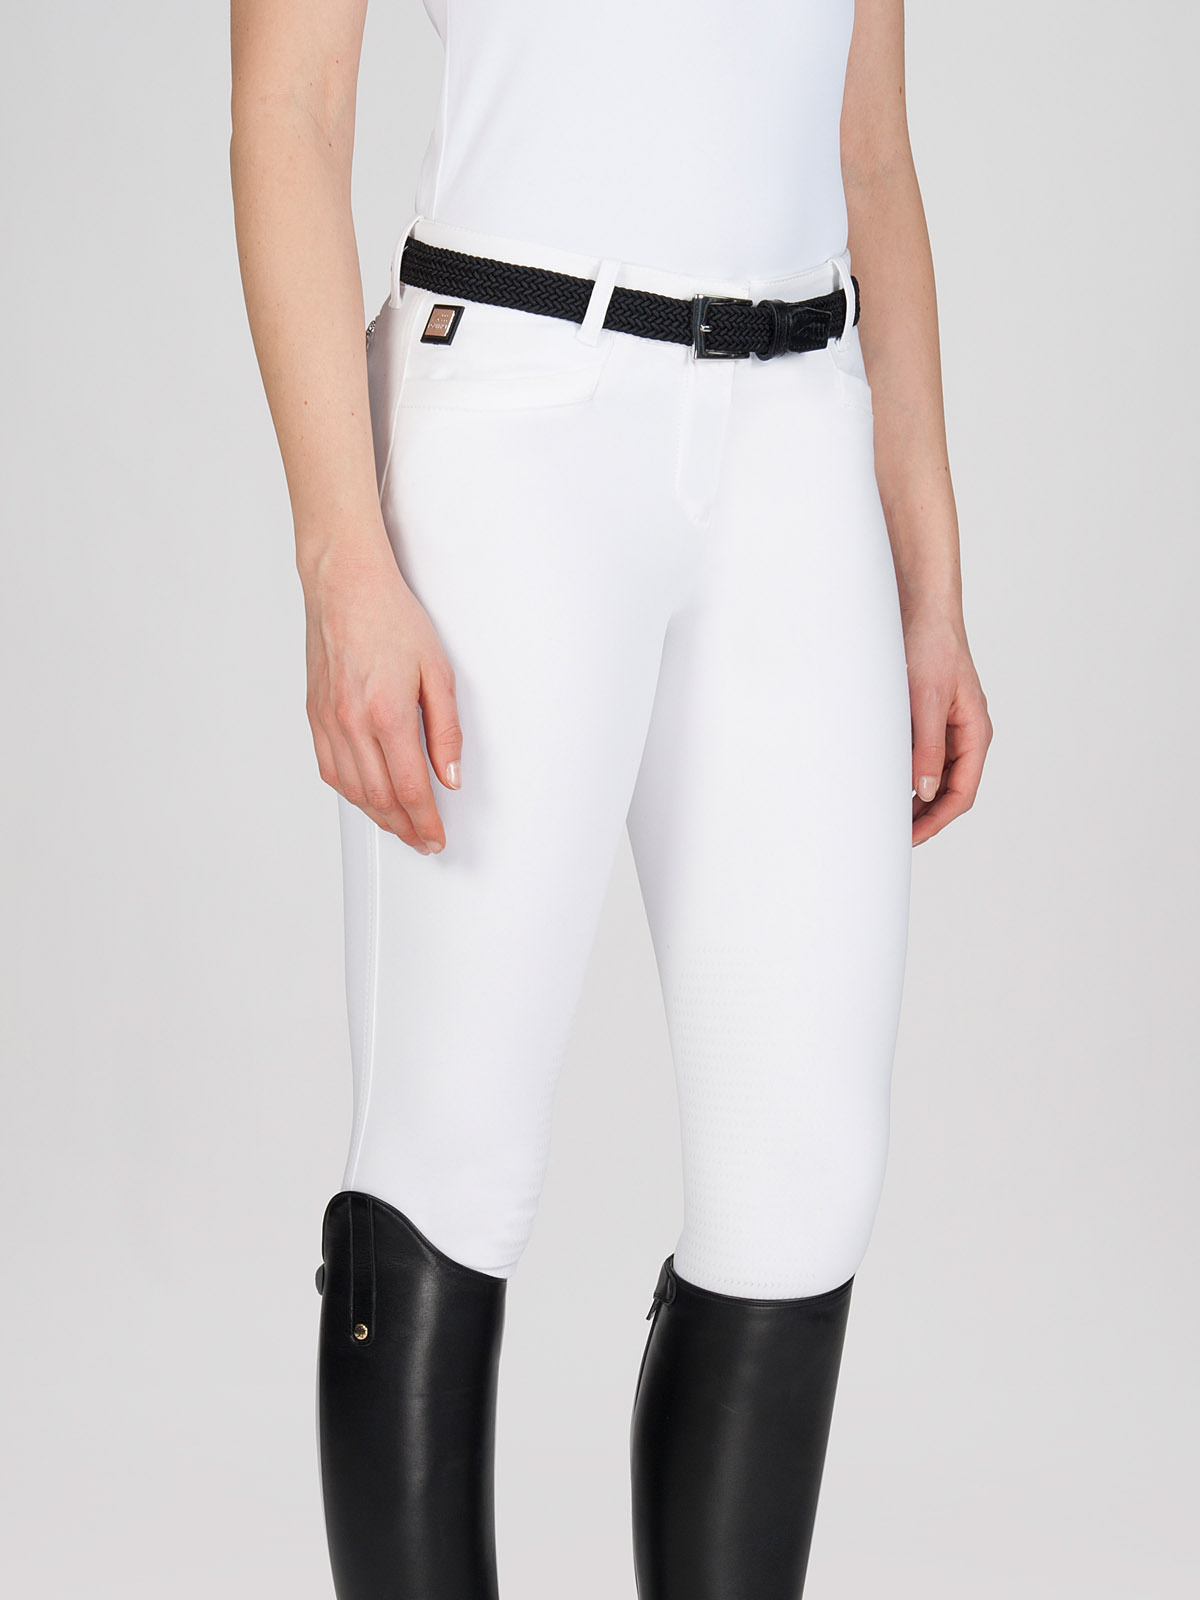 women's Equiline ASH Breeches with X-Grip Knee Patch in white